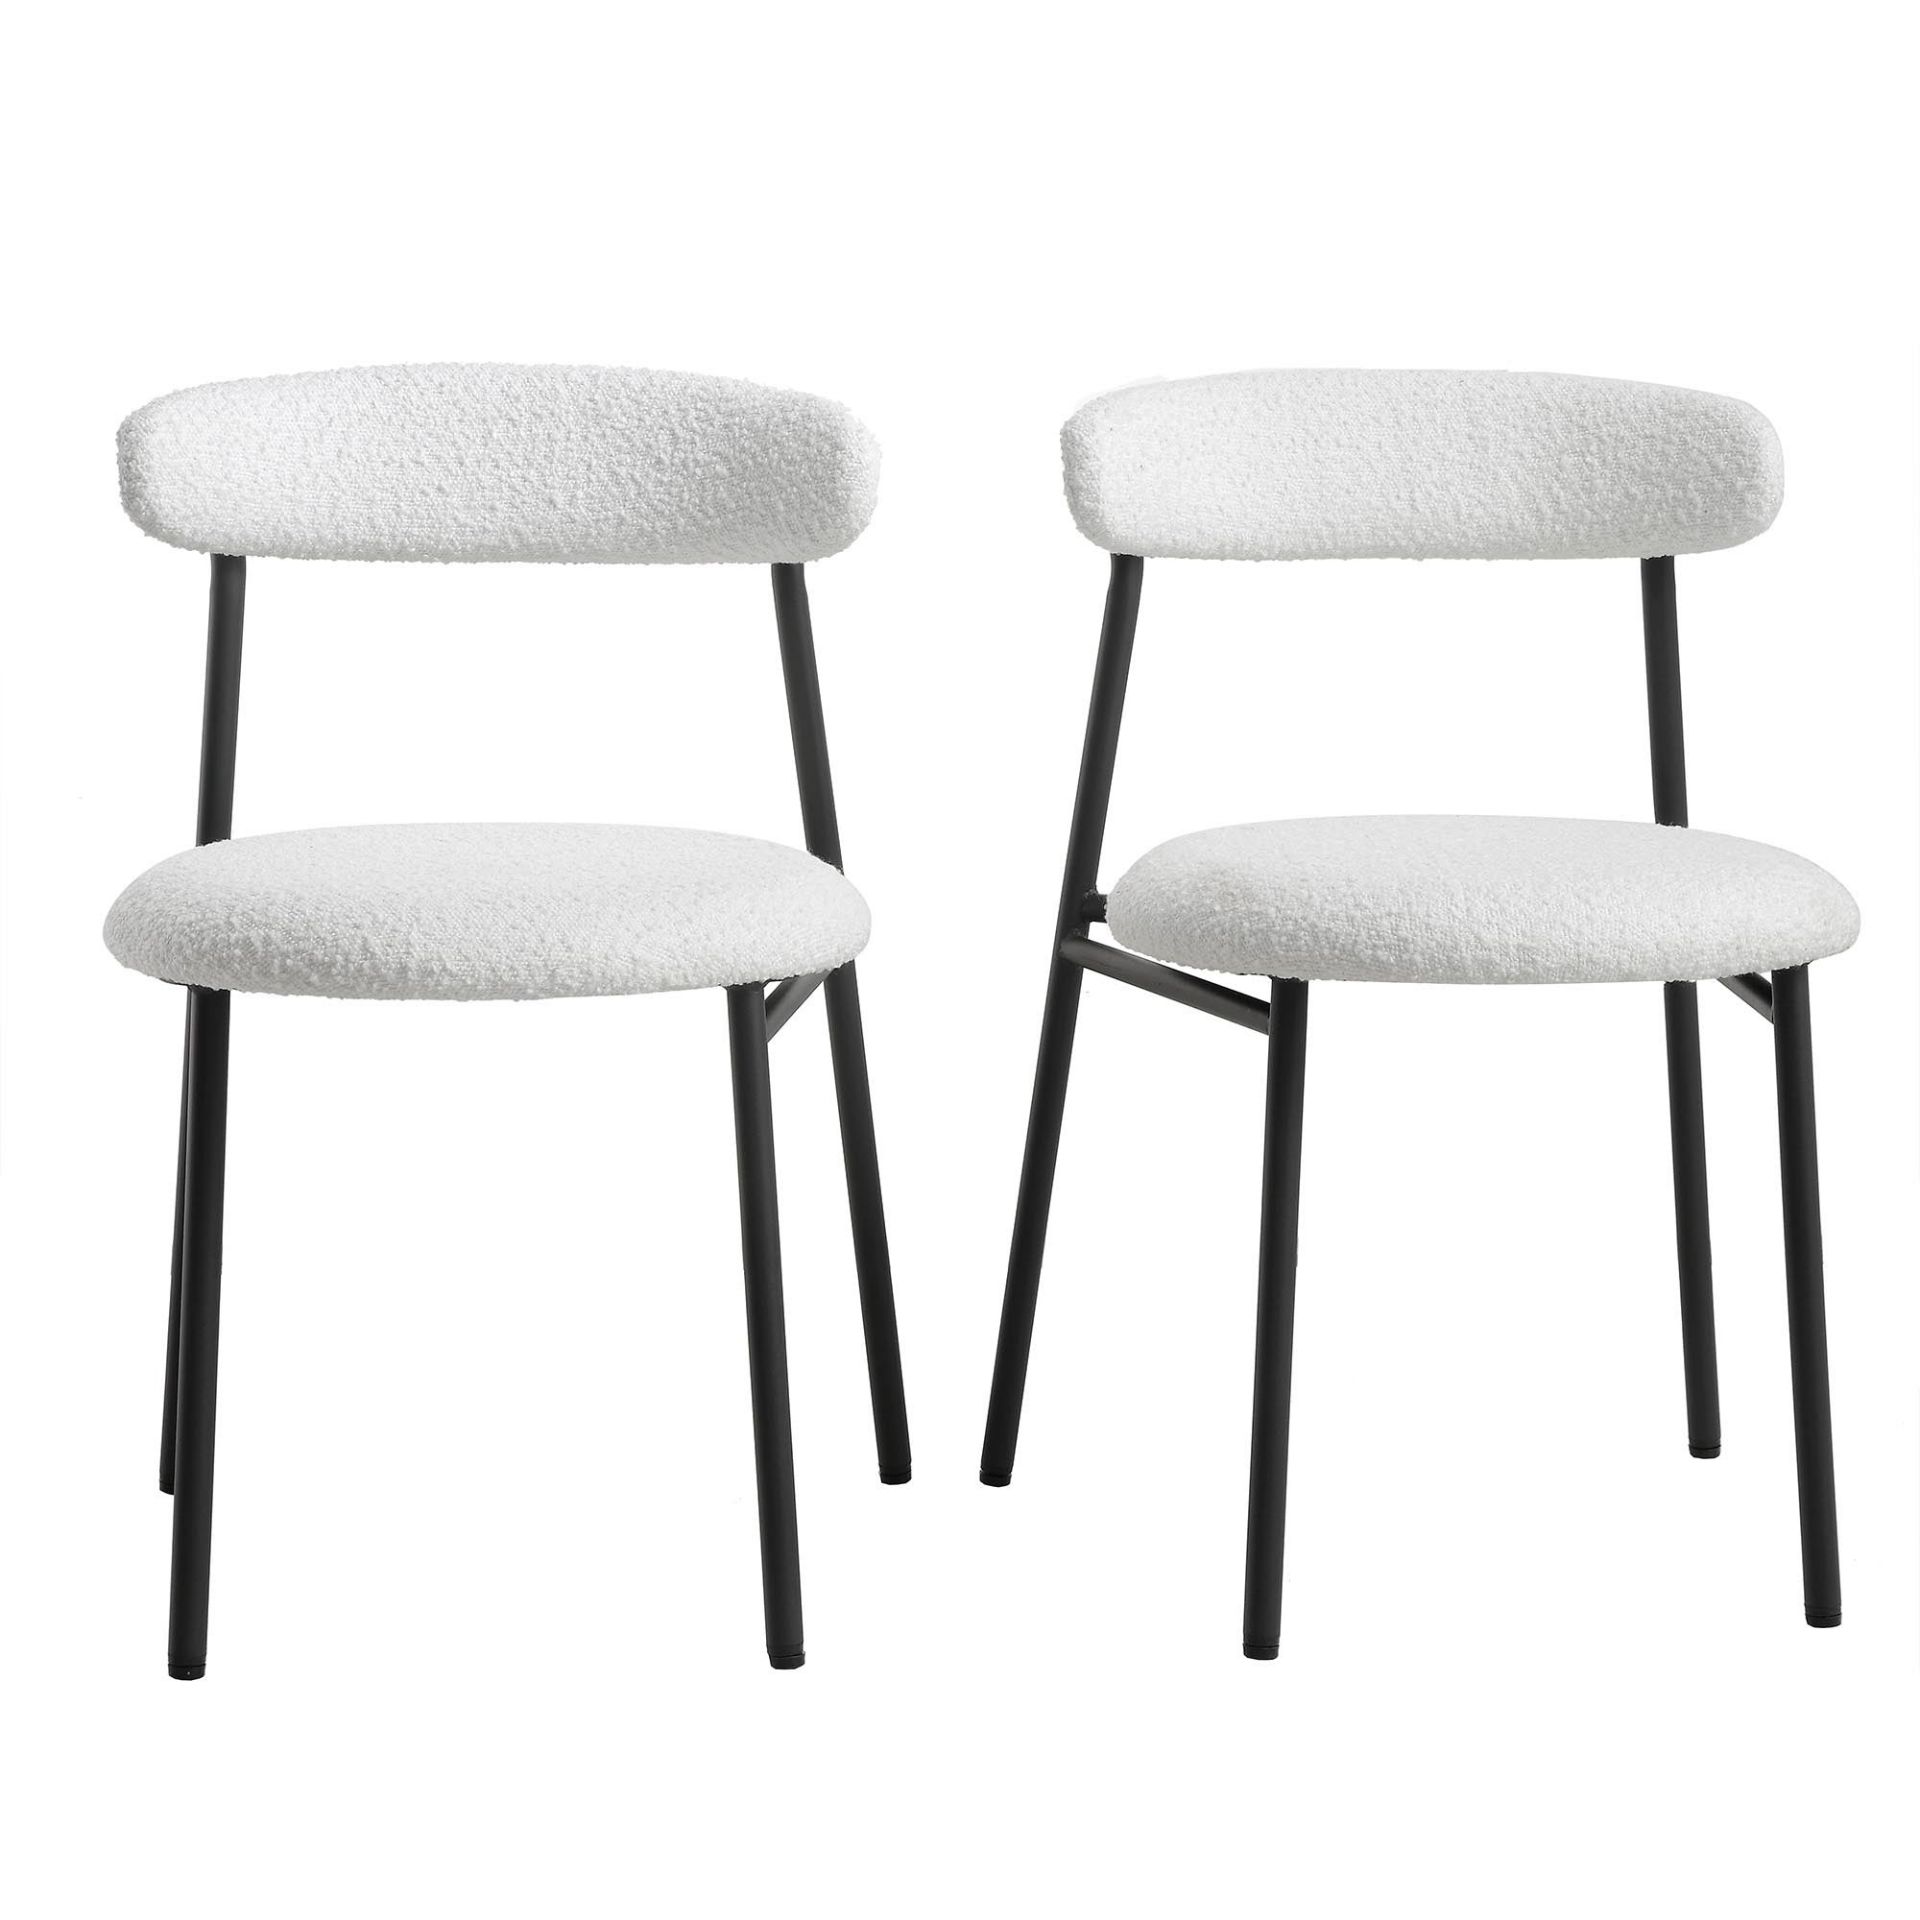 Donna Set of 2 White Boucle Dining Chairs (R30) RRP £149.99